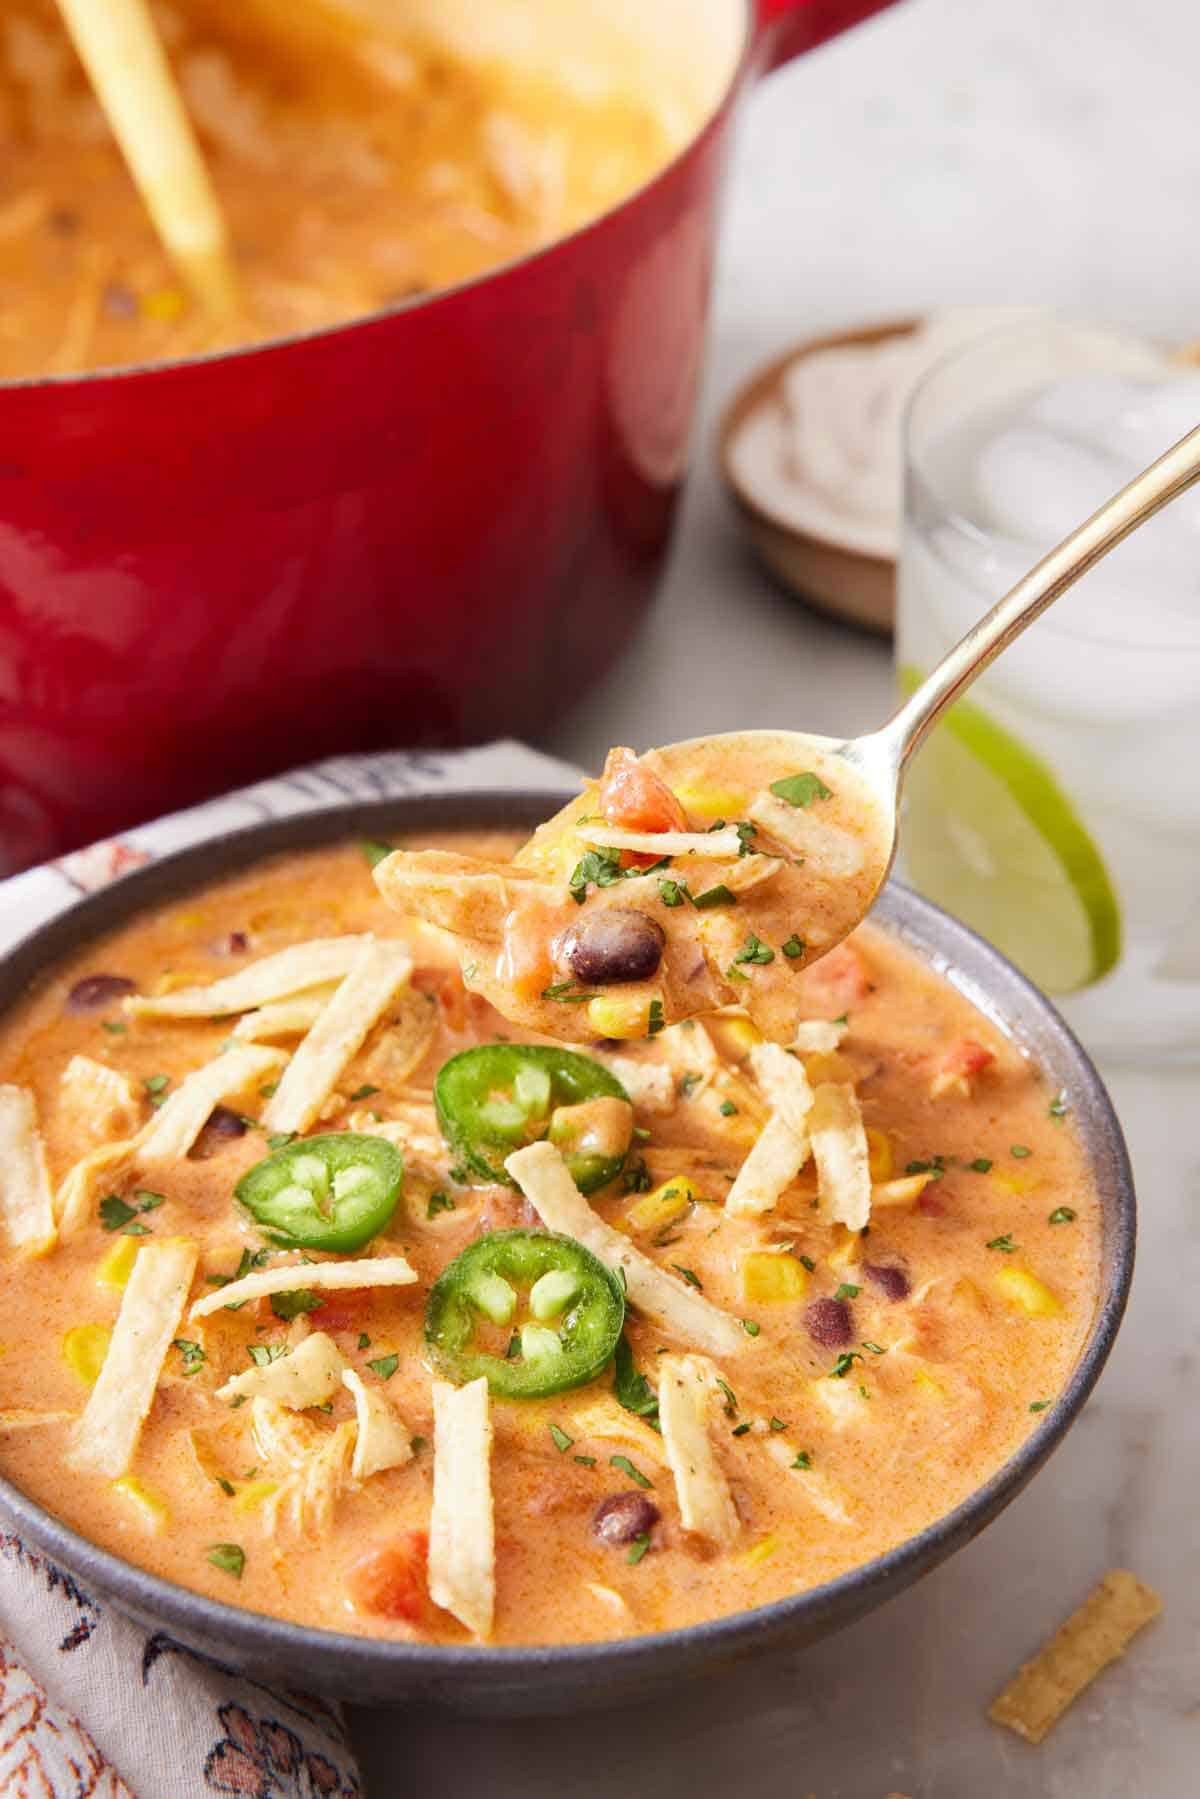 A spoonful of chicken enchilada soup lifted from a bowl.